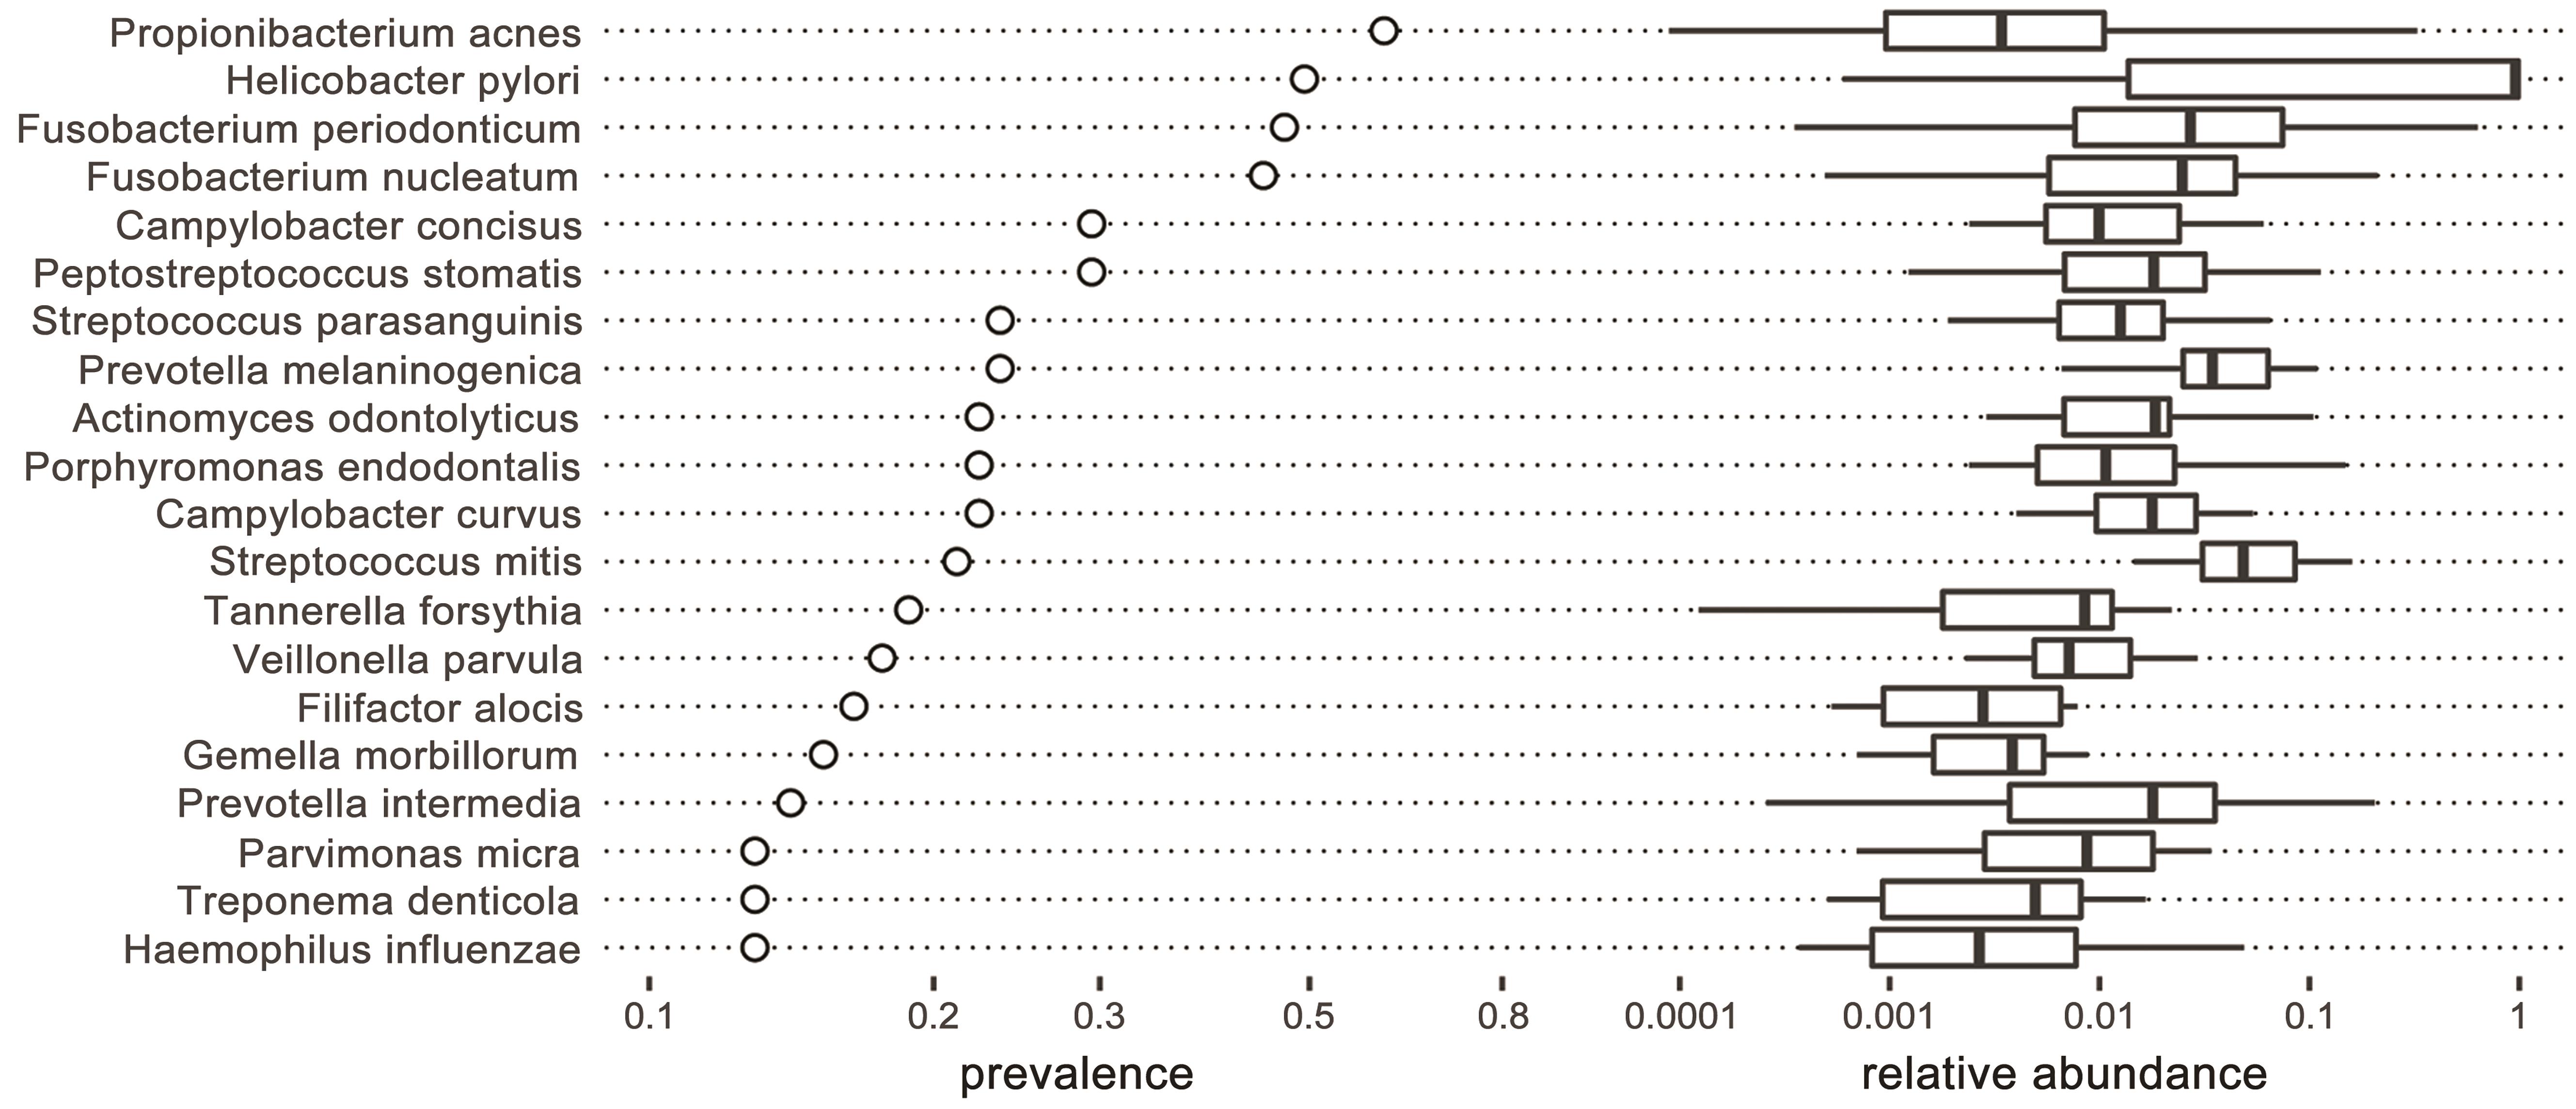 Distribution of prevalence and relative abundance of pathogens in gastric biopsies of healthy individuals.